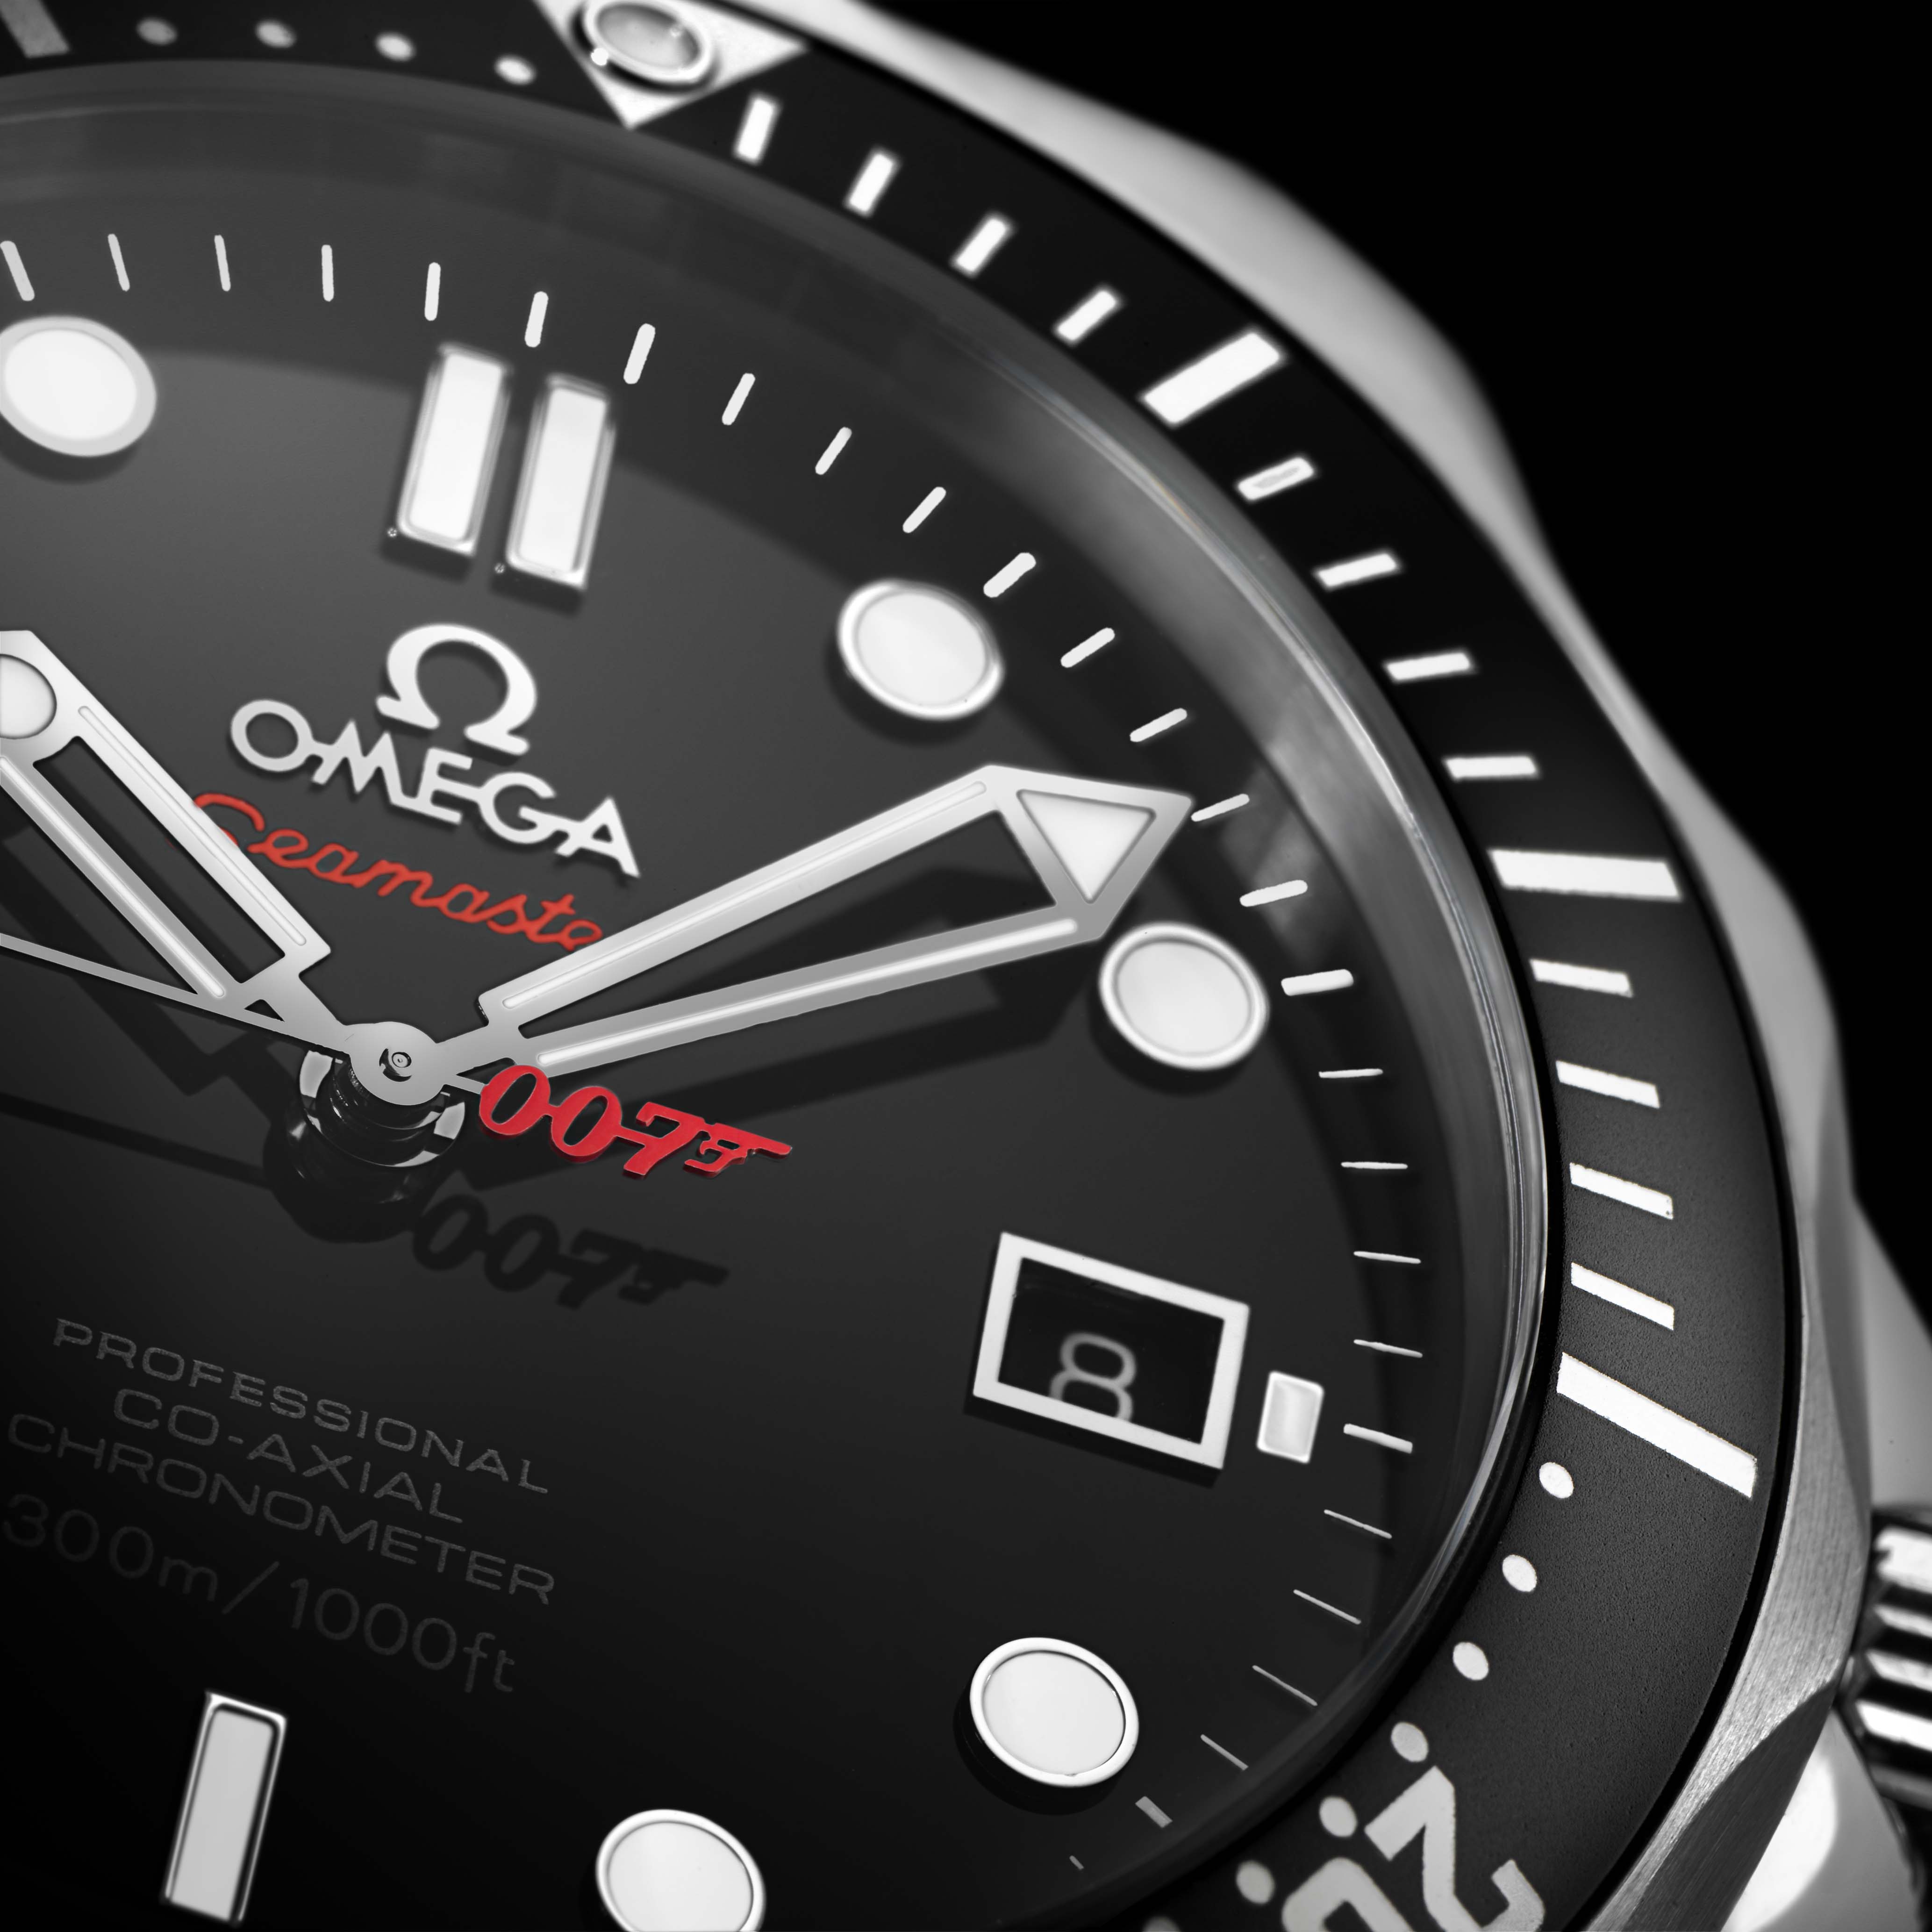 007 omega watch for sale